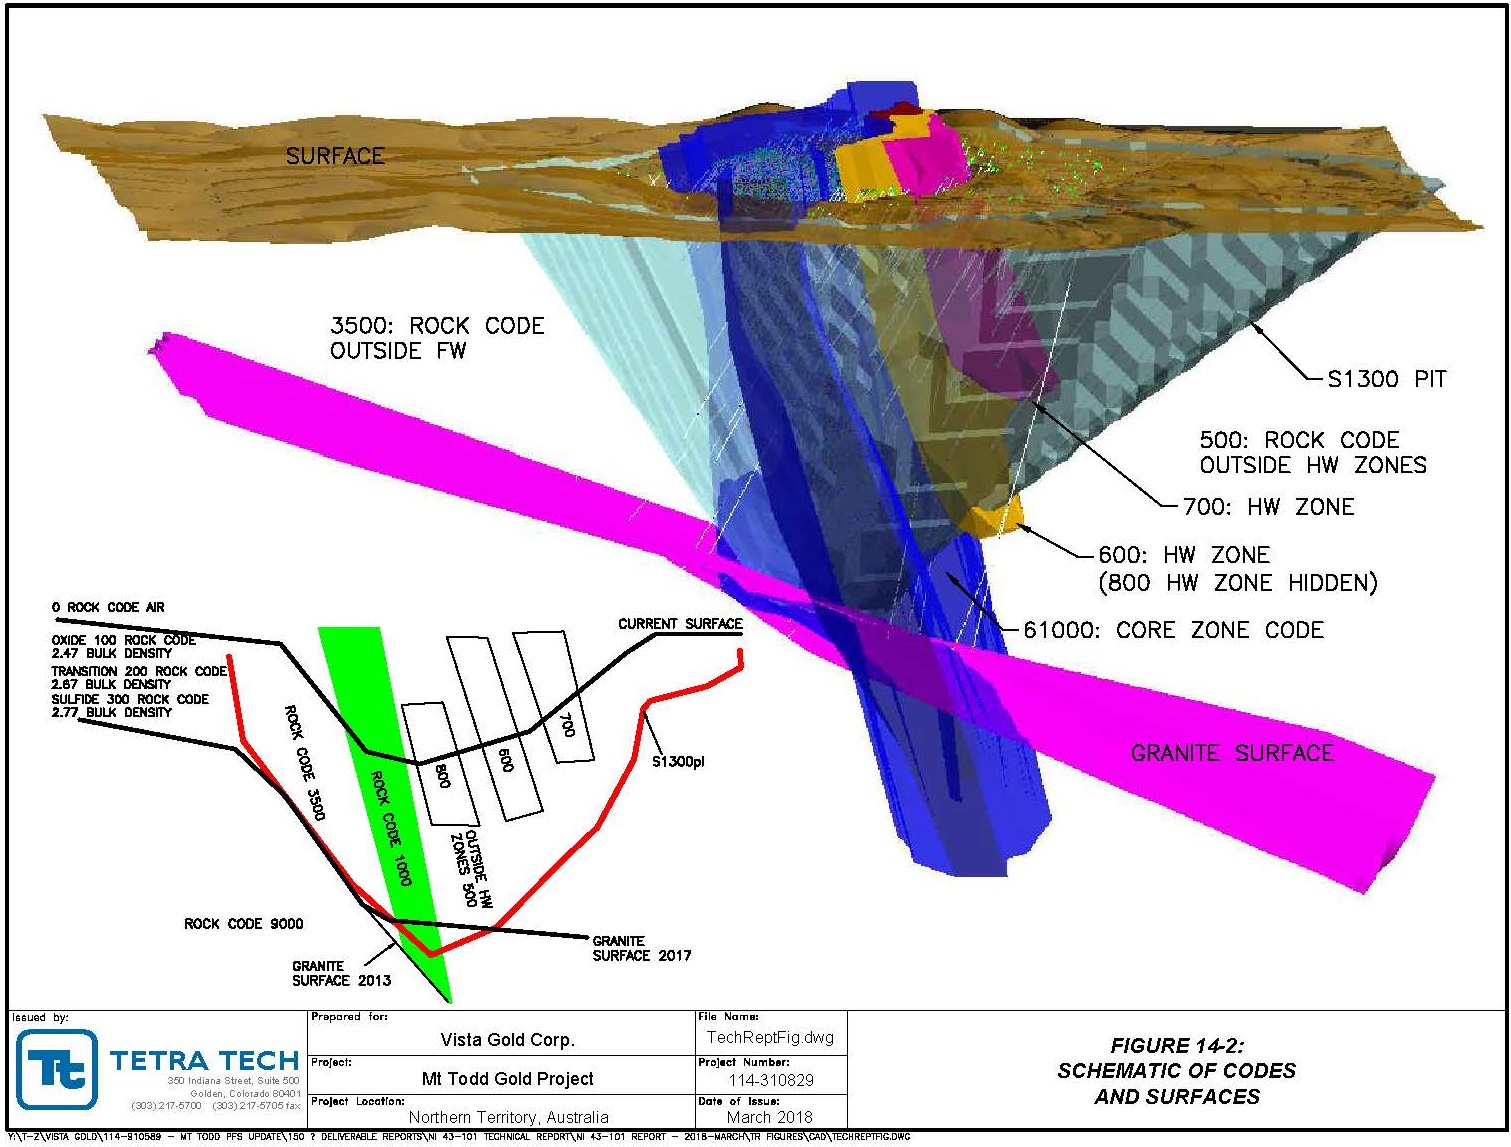 Y:\T-Z\Vista Gold\114-910589 - Mt Todd PFS Update\150 – Deliverable Reports\NI 43-101 Technical Report\NI 43-101 Report - 2018-March\Figures and Tables\Figure 14-2.jpg